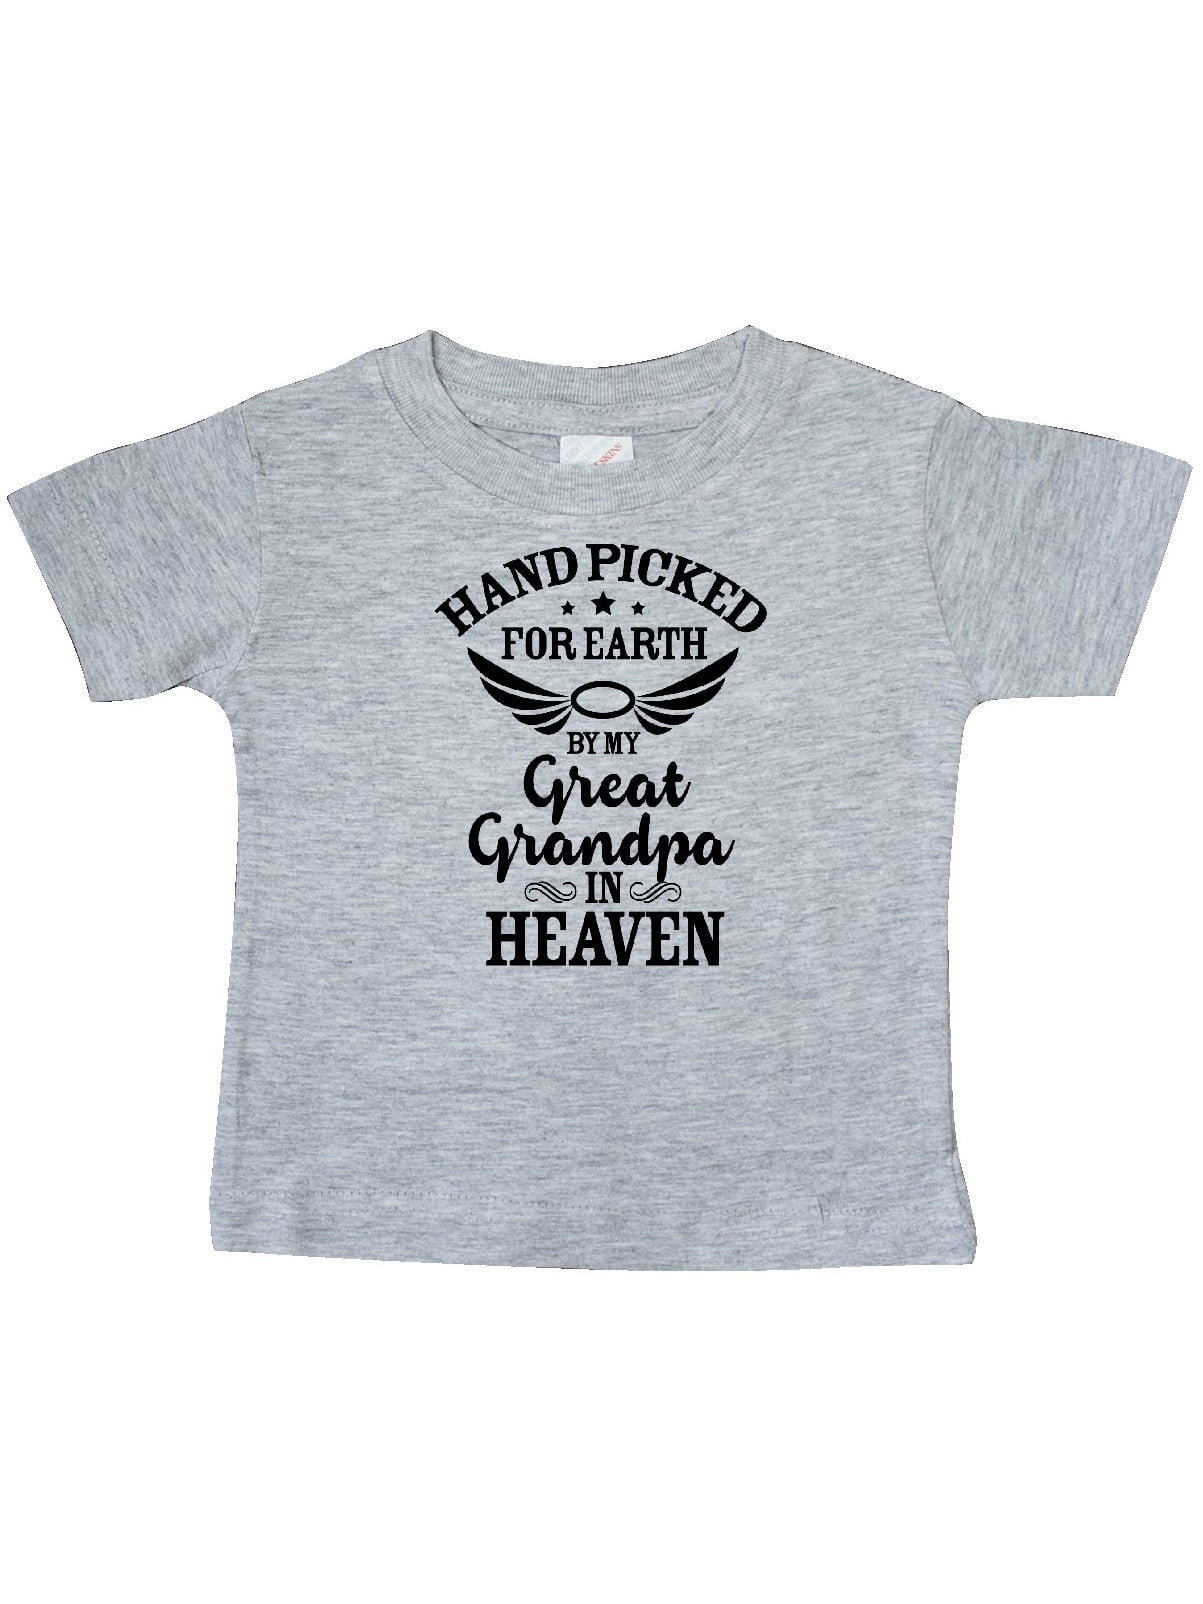 Handpicked for Earth By My Great Grandpa in Heaven Baby T-Shirt ...